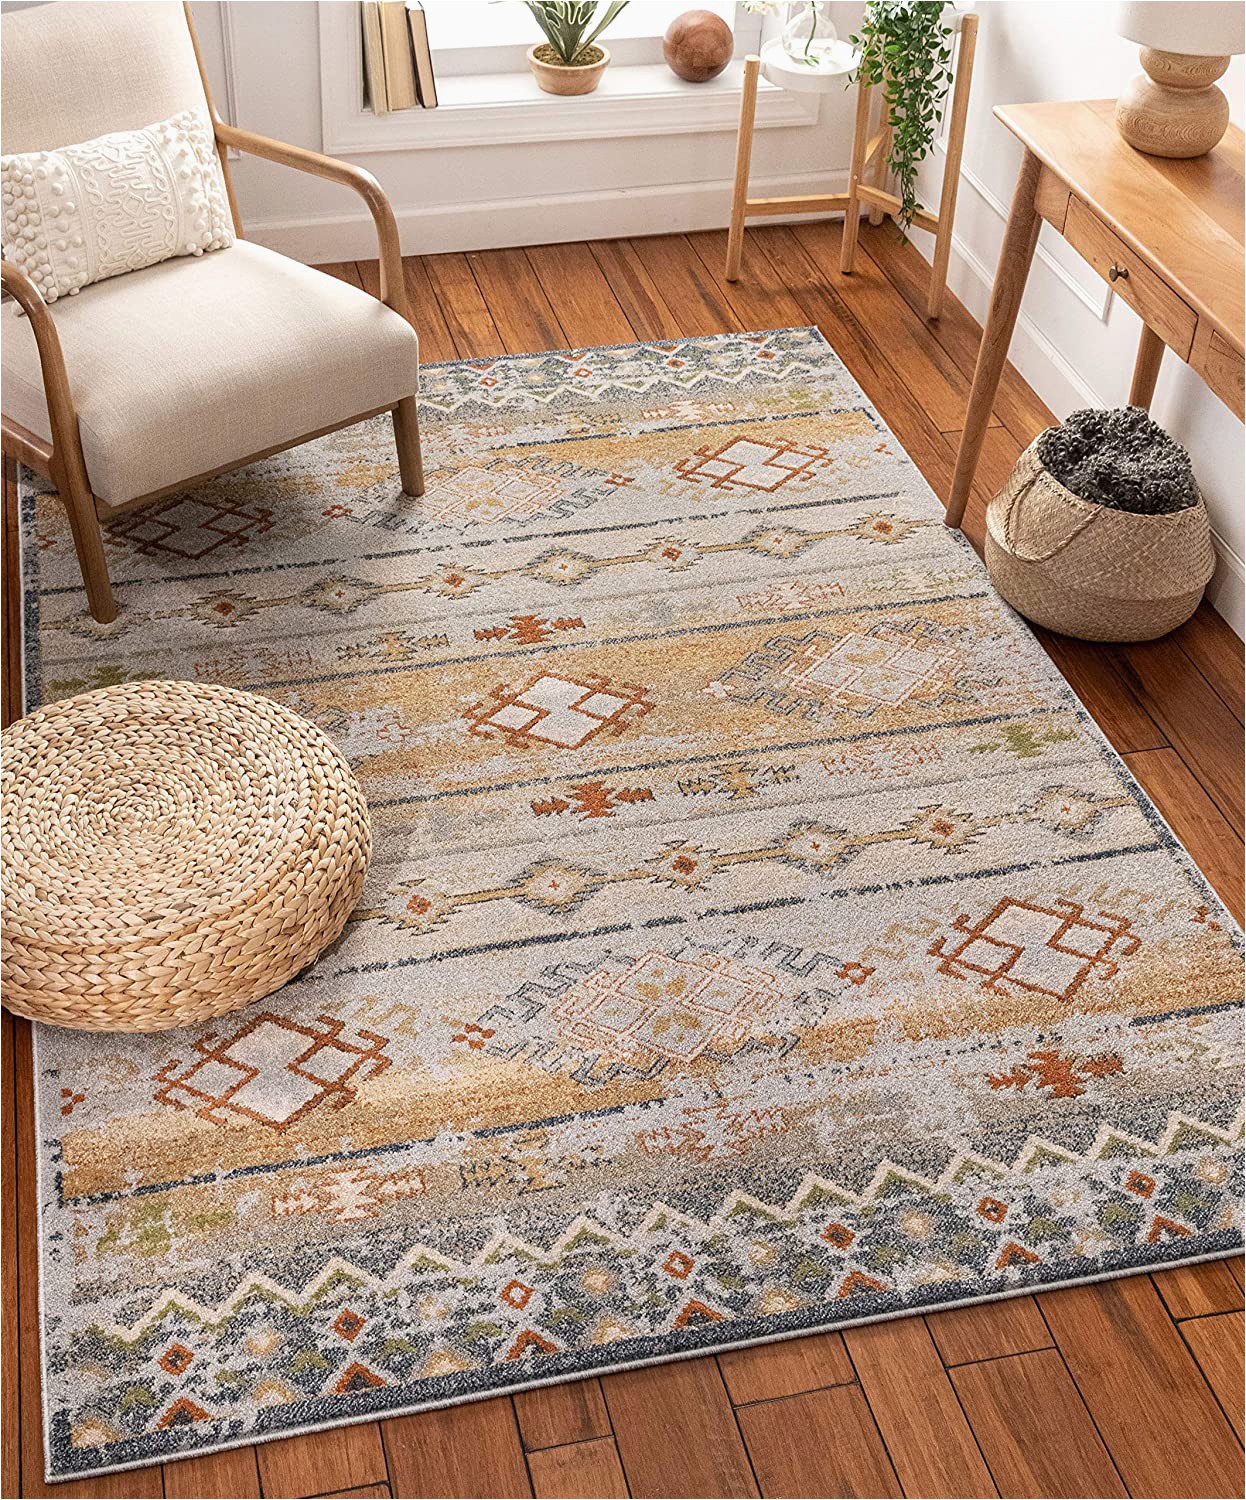 Bed Bath and Beyond area Rugs 4×6 Well Woven Elu Cream Vintage Panel Pattern area Rug 5×7 5 3" X 7 3"